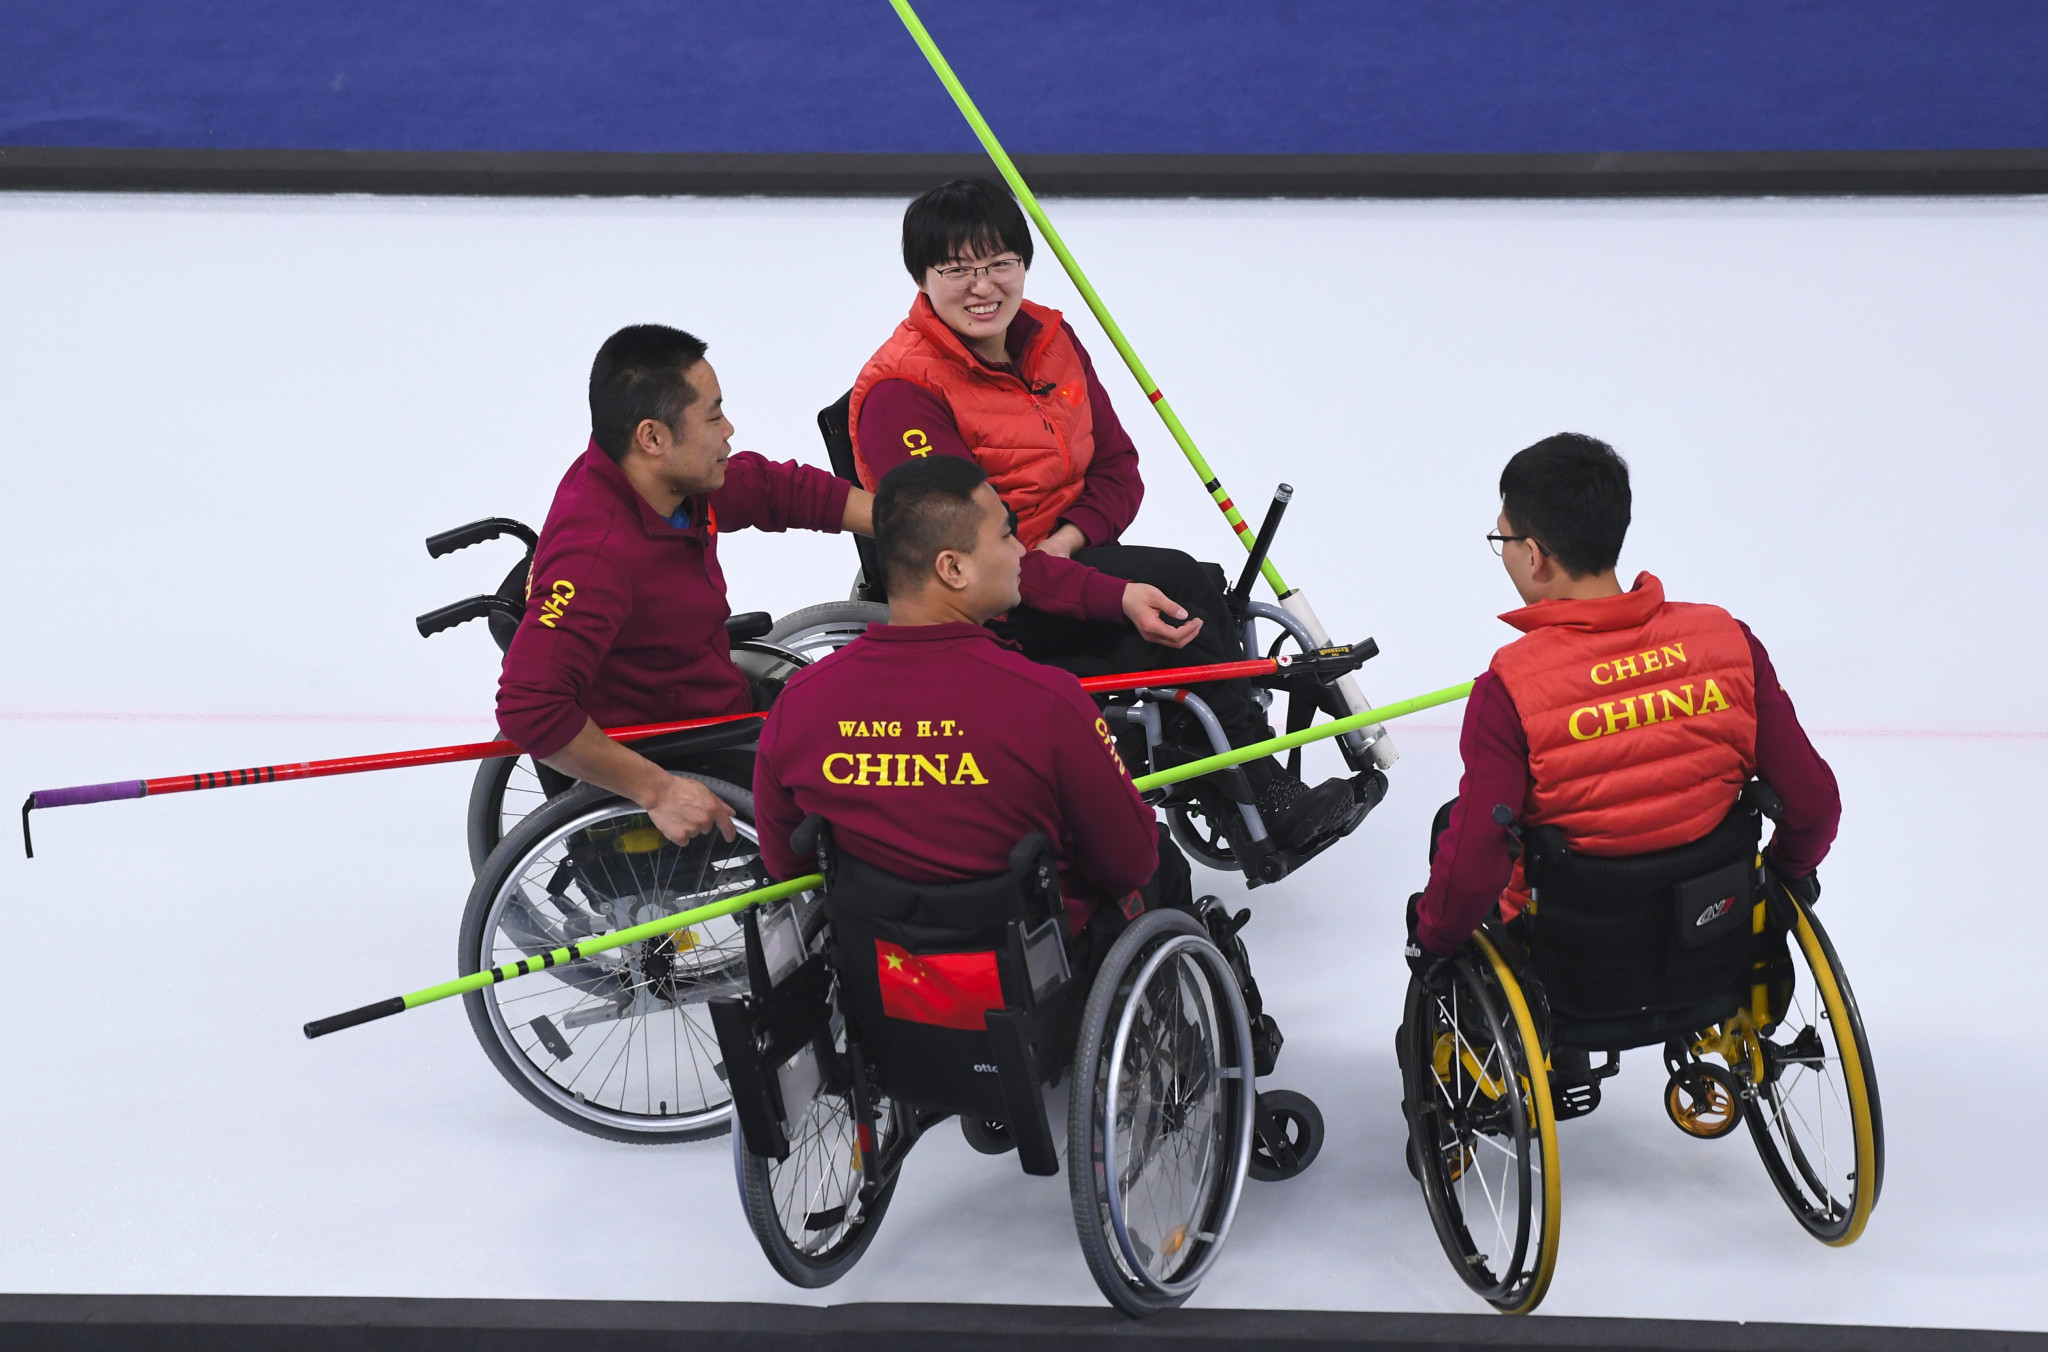 China to defend World Wheelchair Curling Championship title in Wetzikon